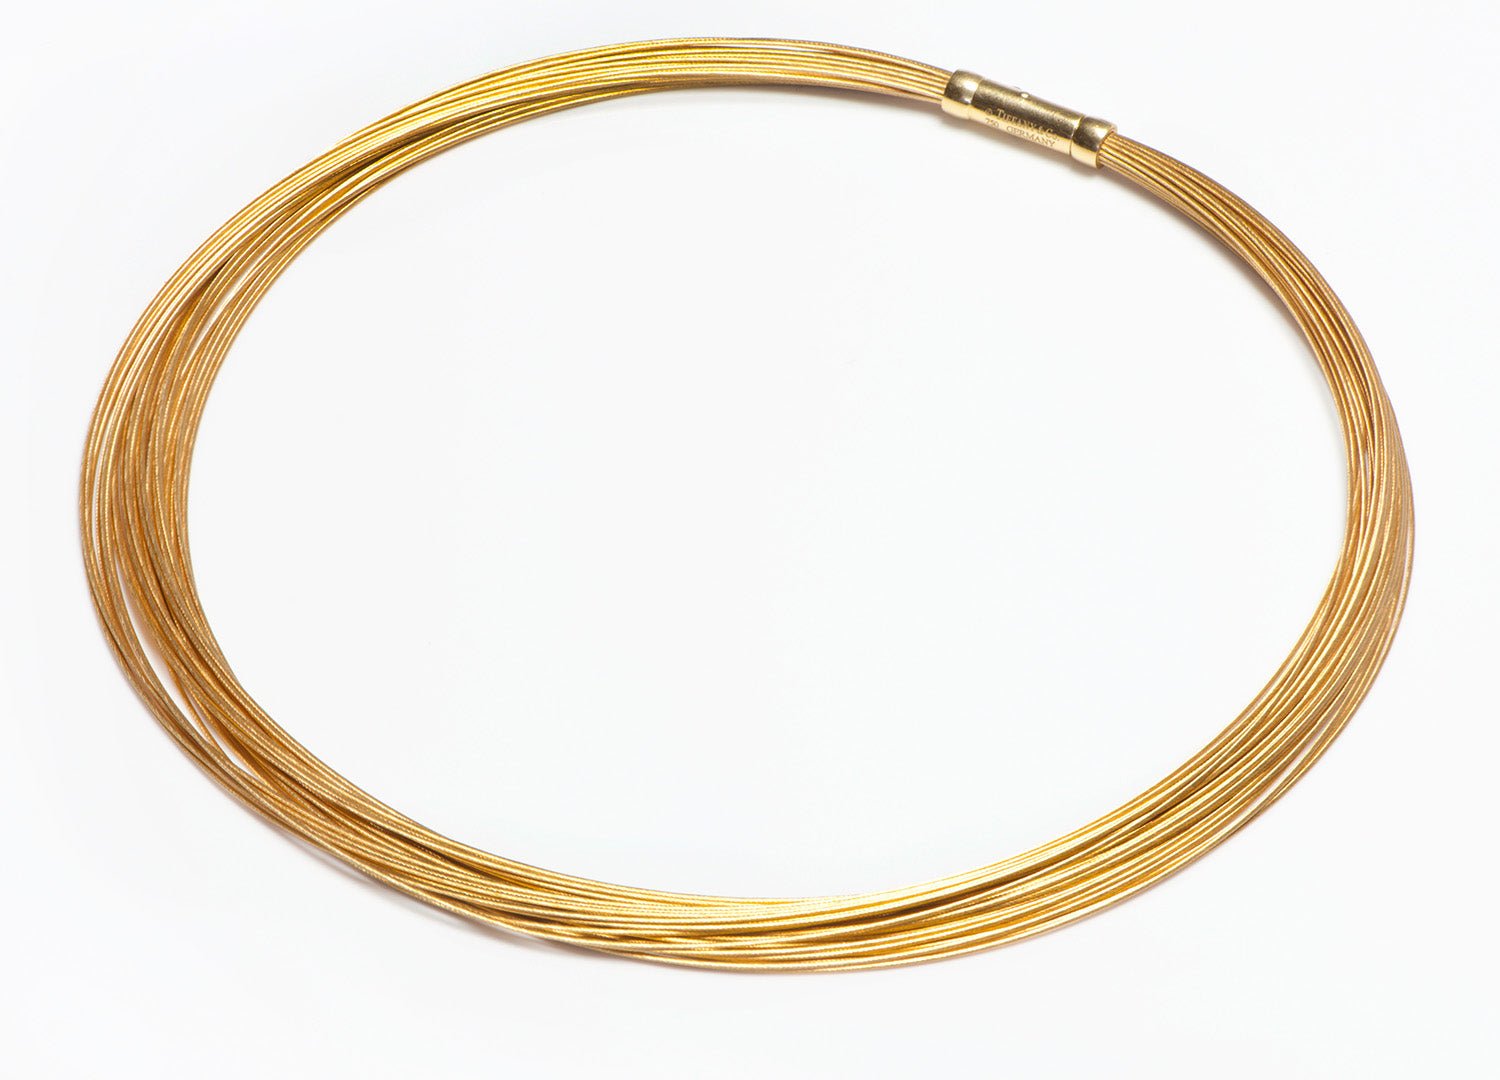 Tiffany & Co. 18K Gold Wire Necklace/Choker